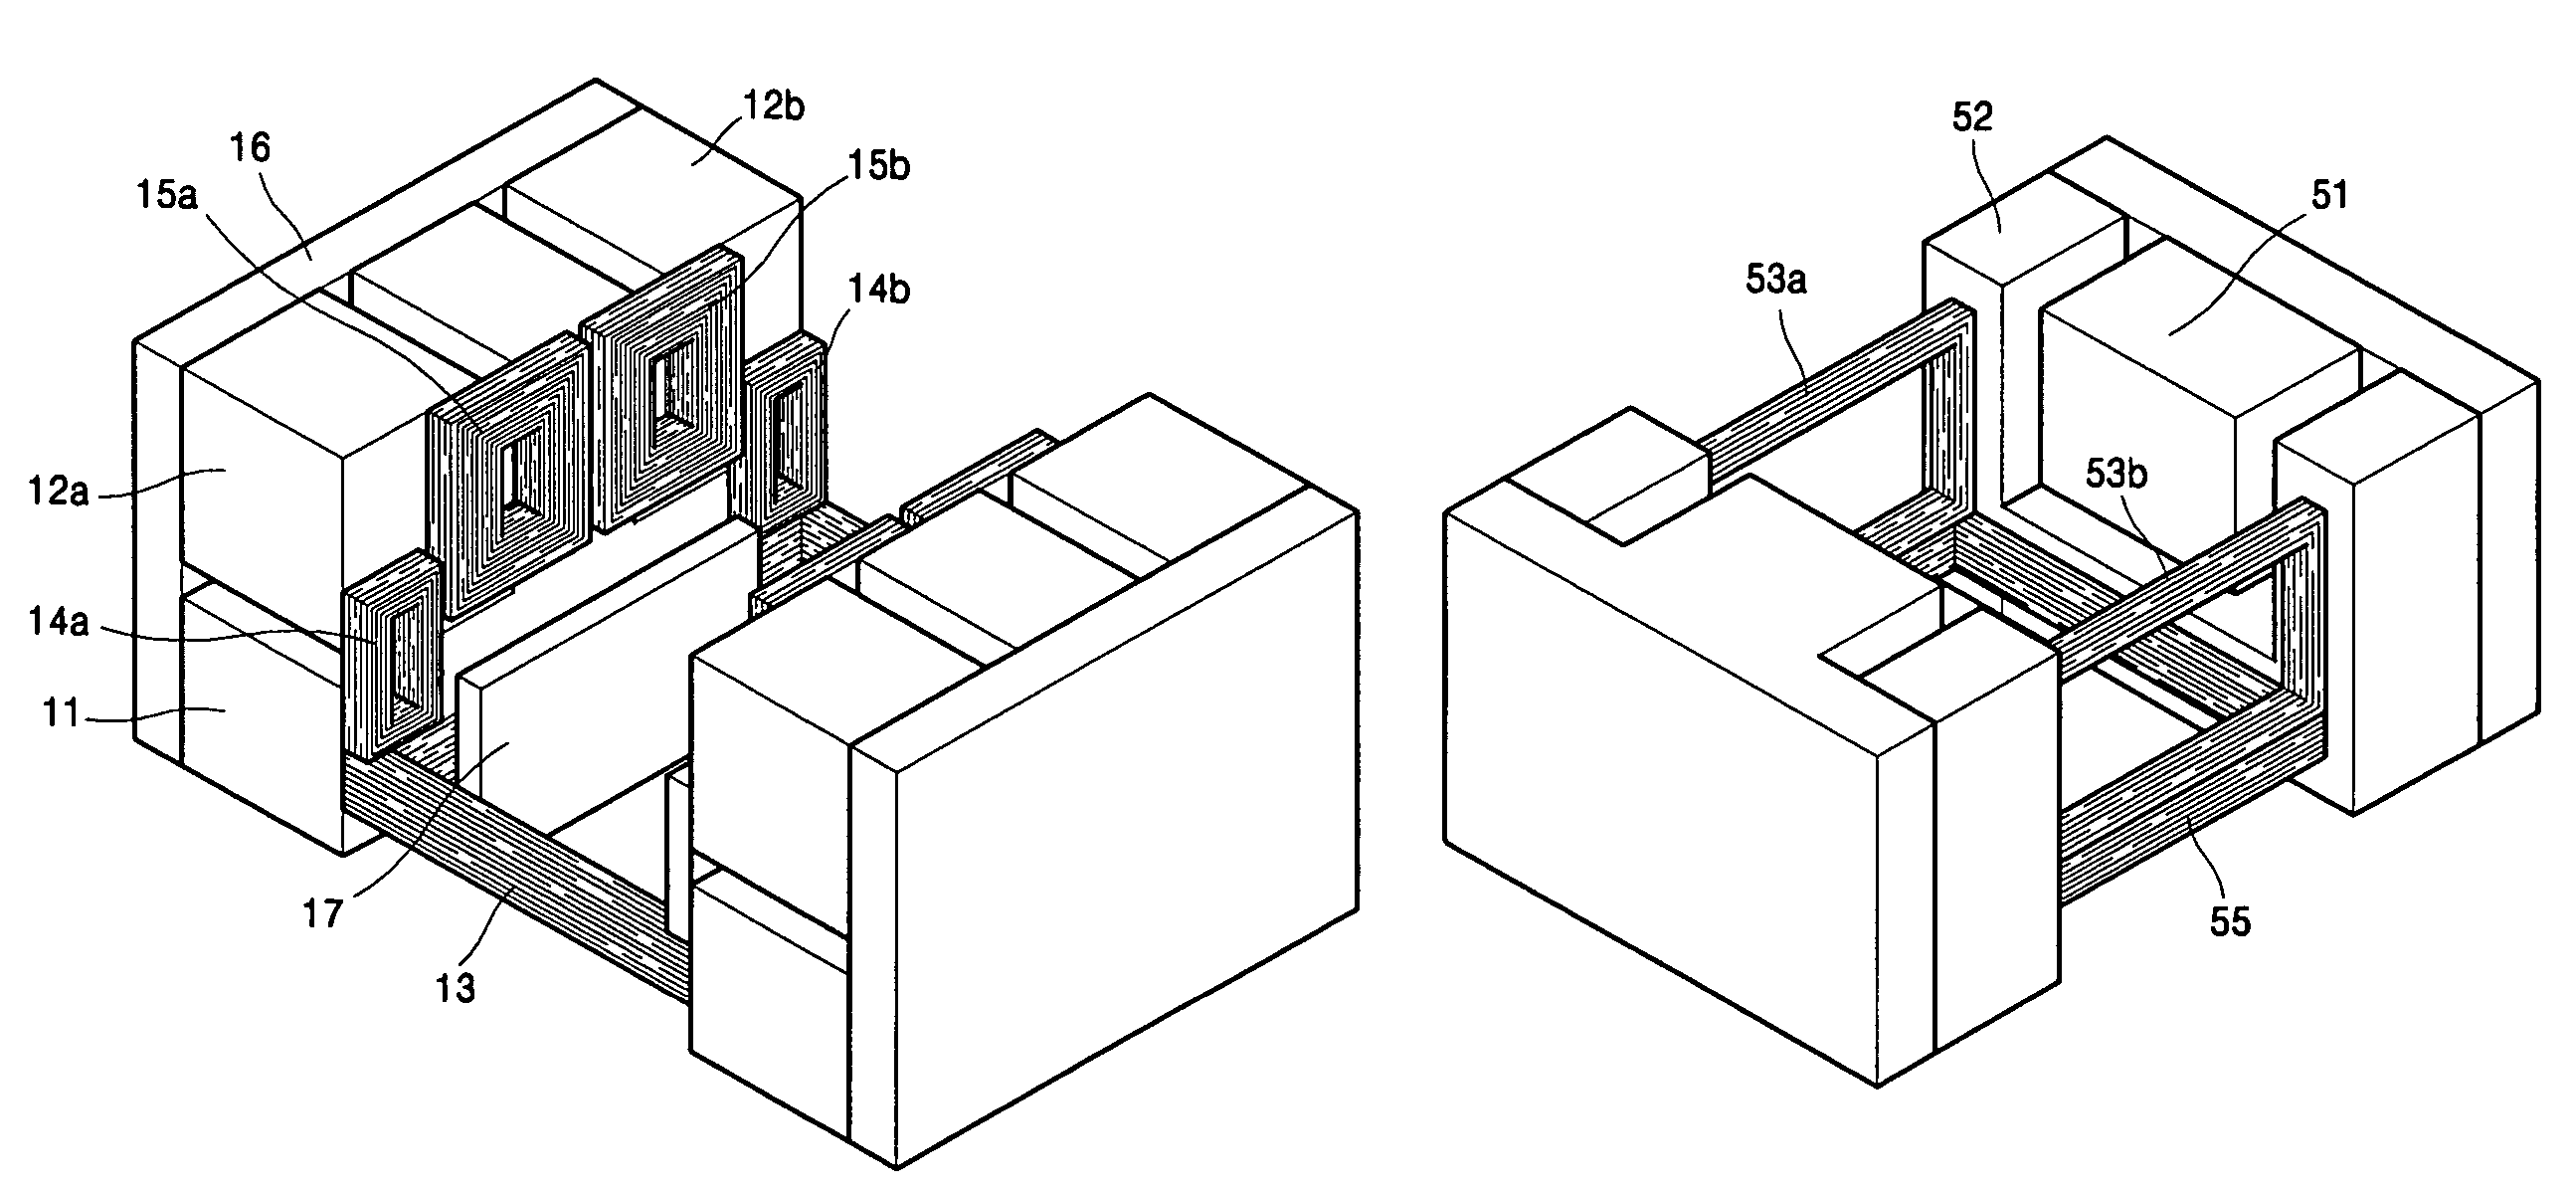 Recording and/or reproducing apparatus with an optical pickup actuator having high thrust